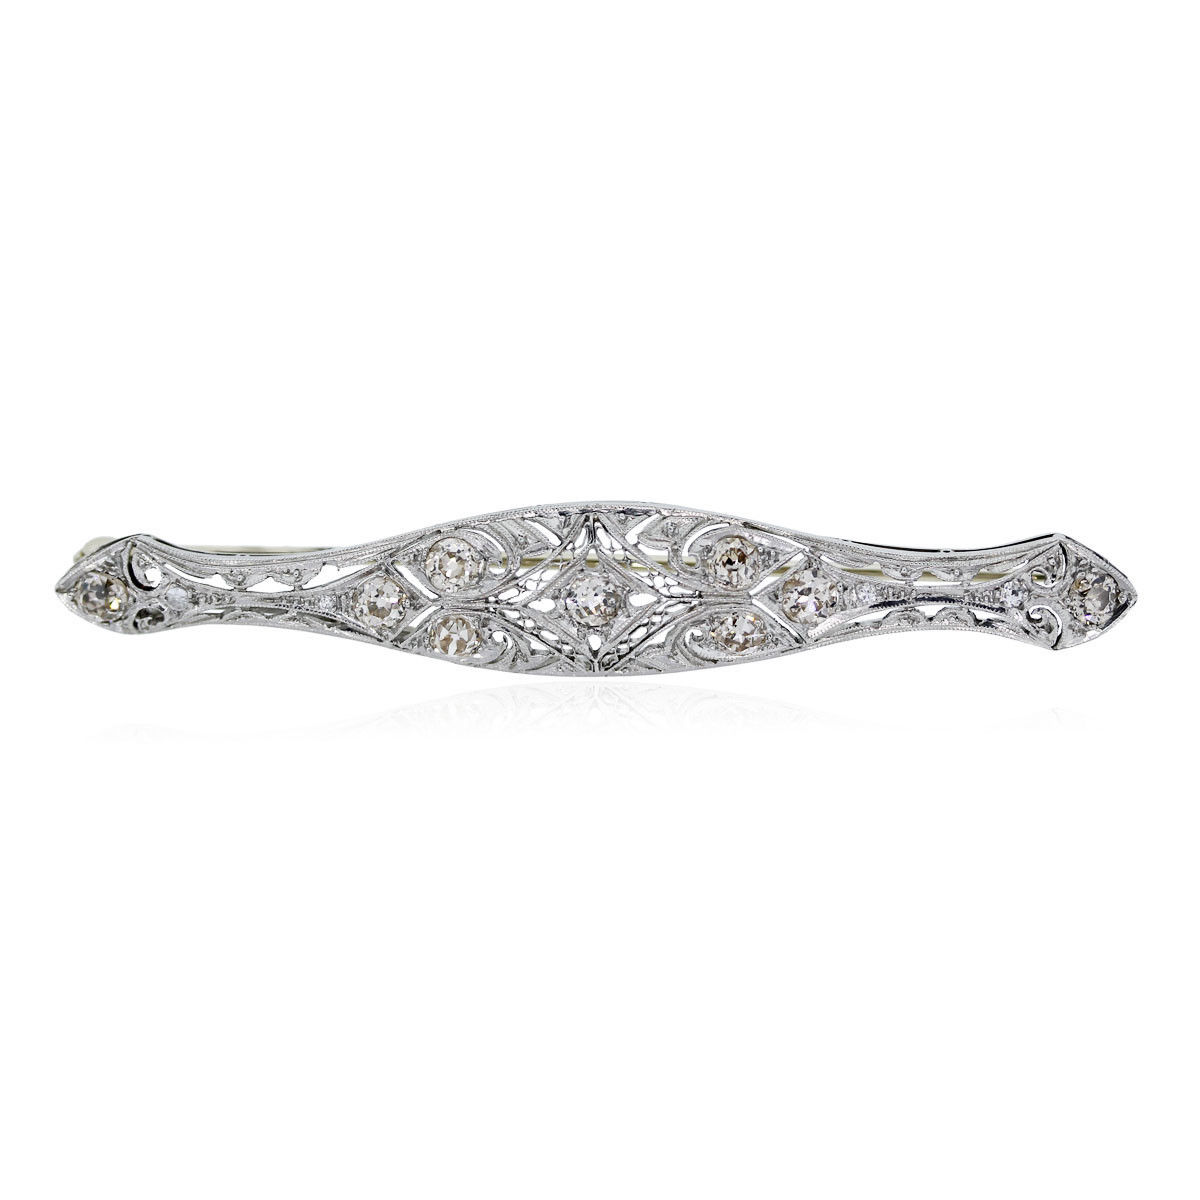 You are viewing this Platinum and White Diamond Vintage Pin!